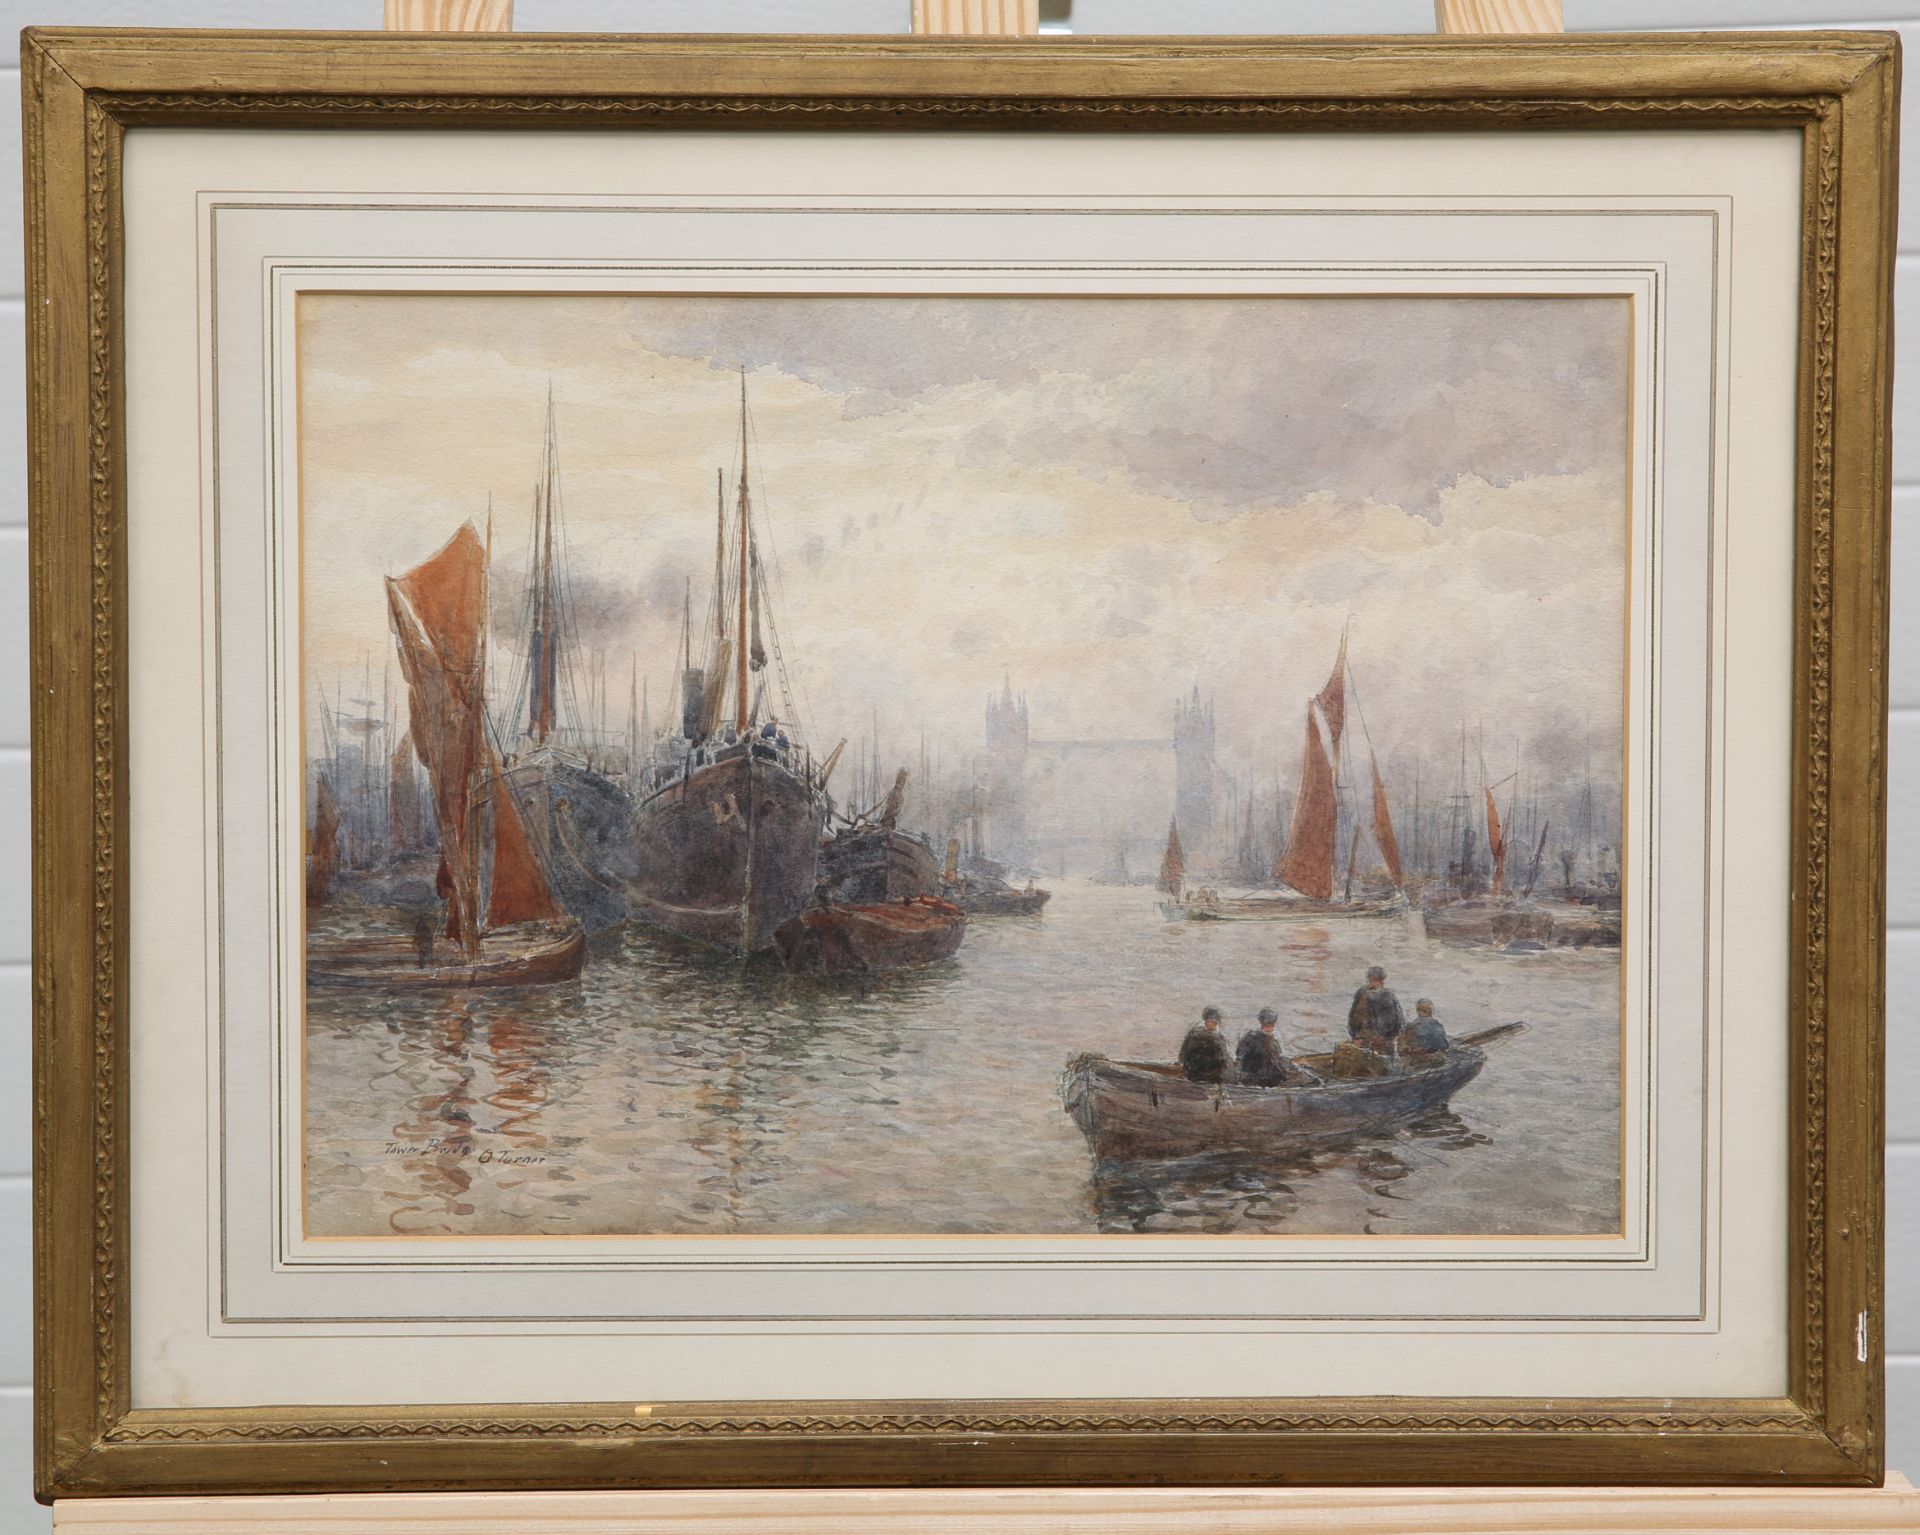 A*** TURNER, "TOWER BRIDGE", signed and titled lower left - Image 2 of 2